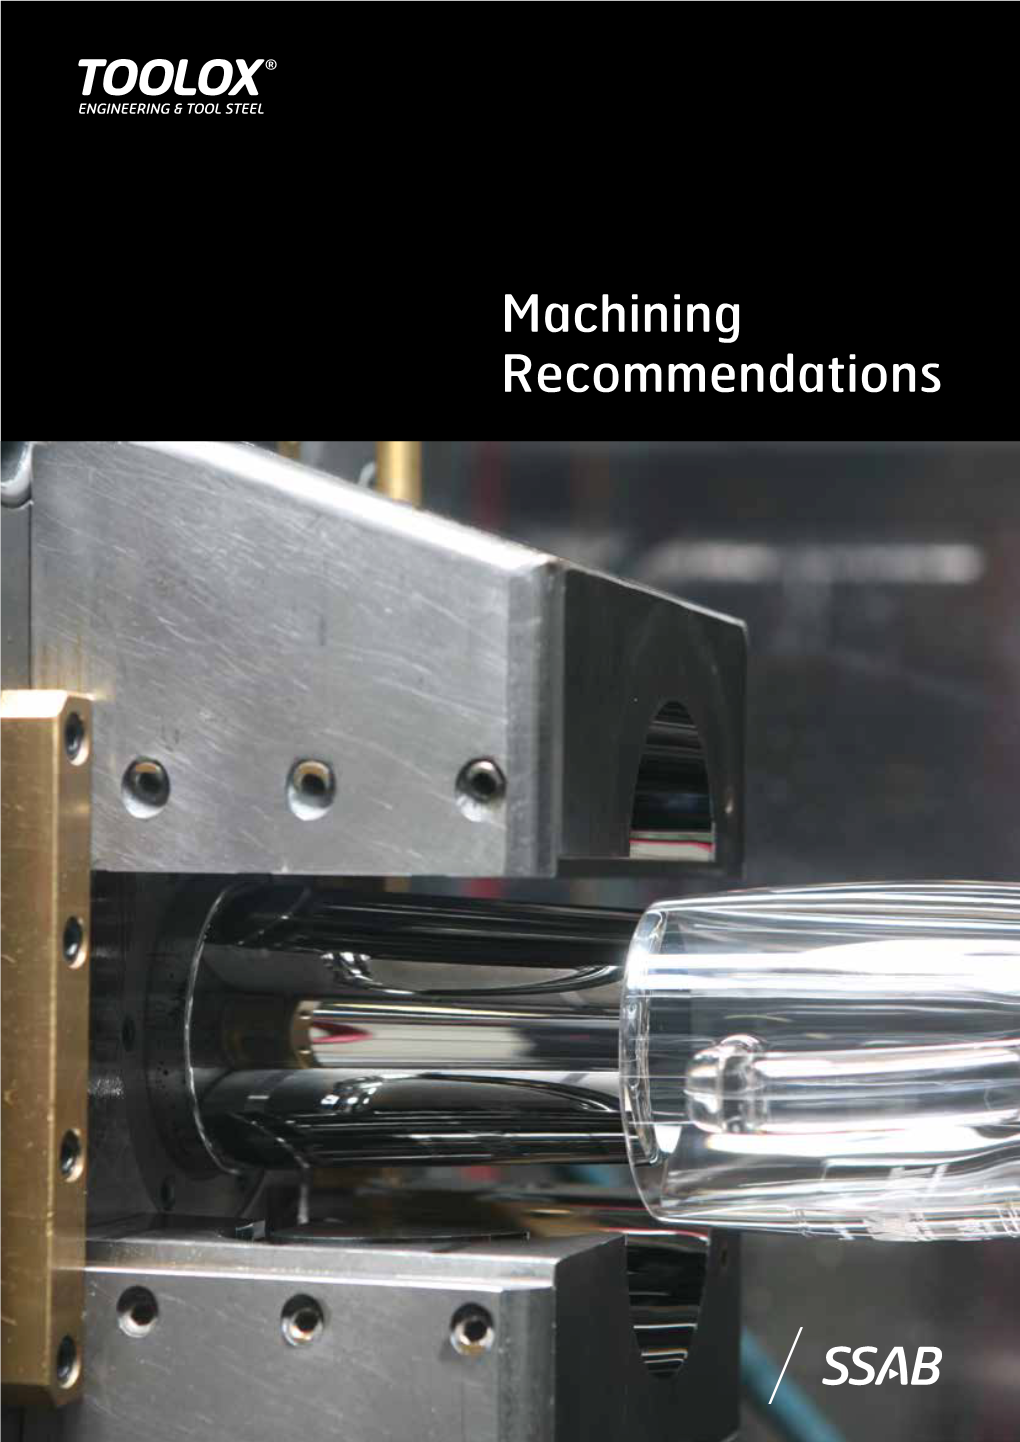 Machining Recommendations WHAT IS TOOLOX?